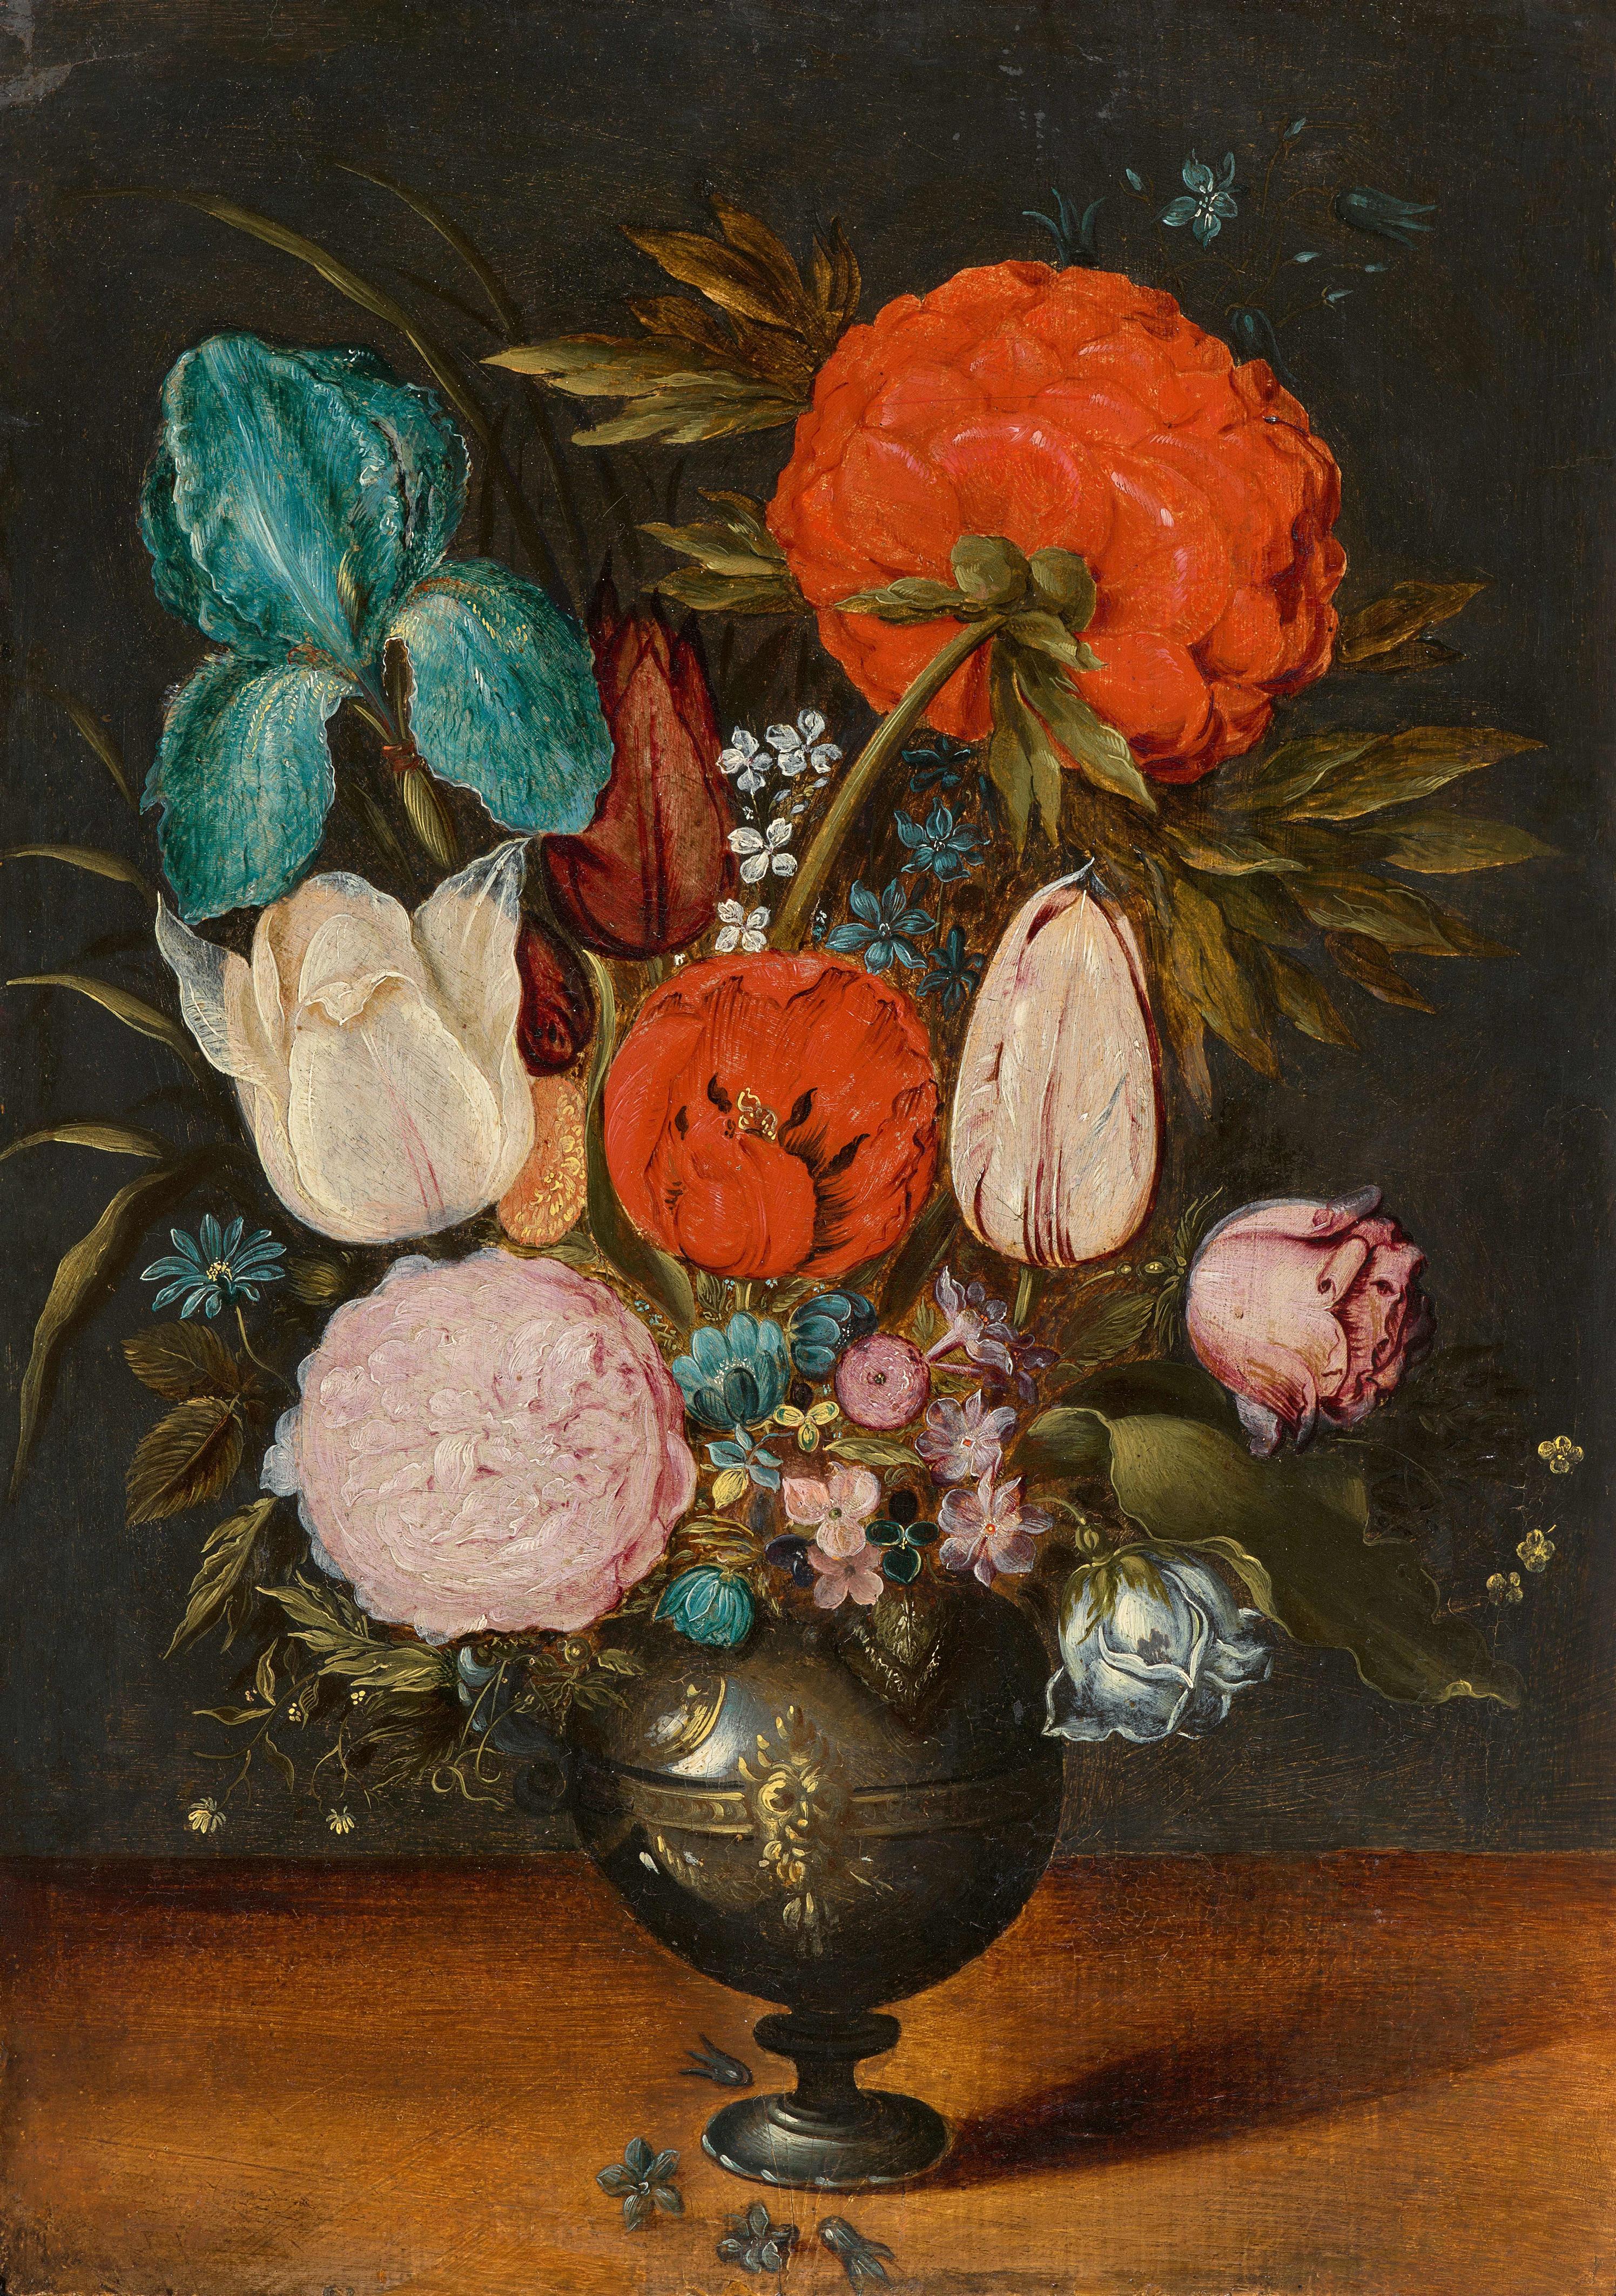 Jan Brueghel the Younger - Tulips, Iris, Roses and Peonies in a Vase - image-1